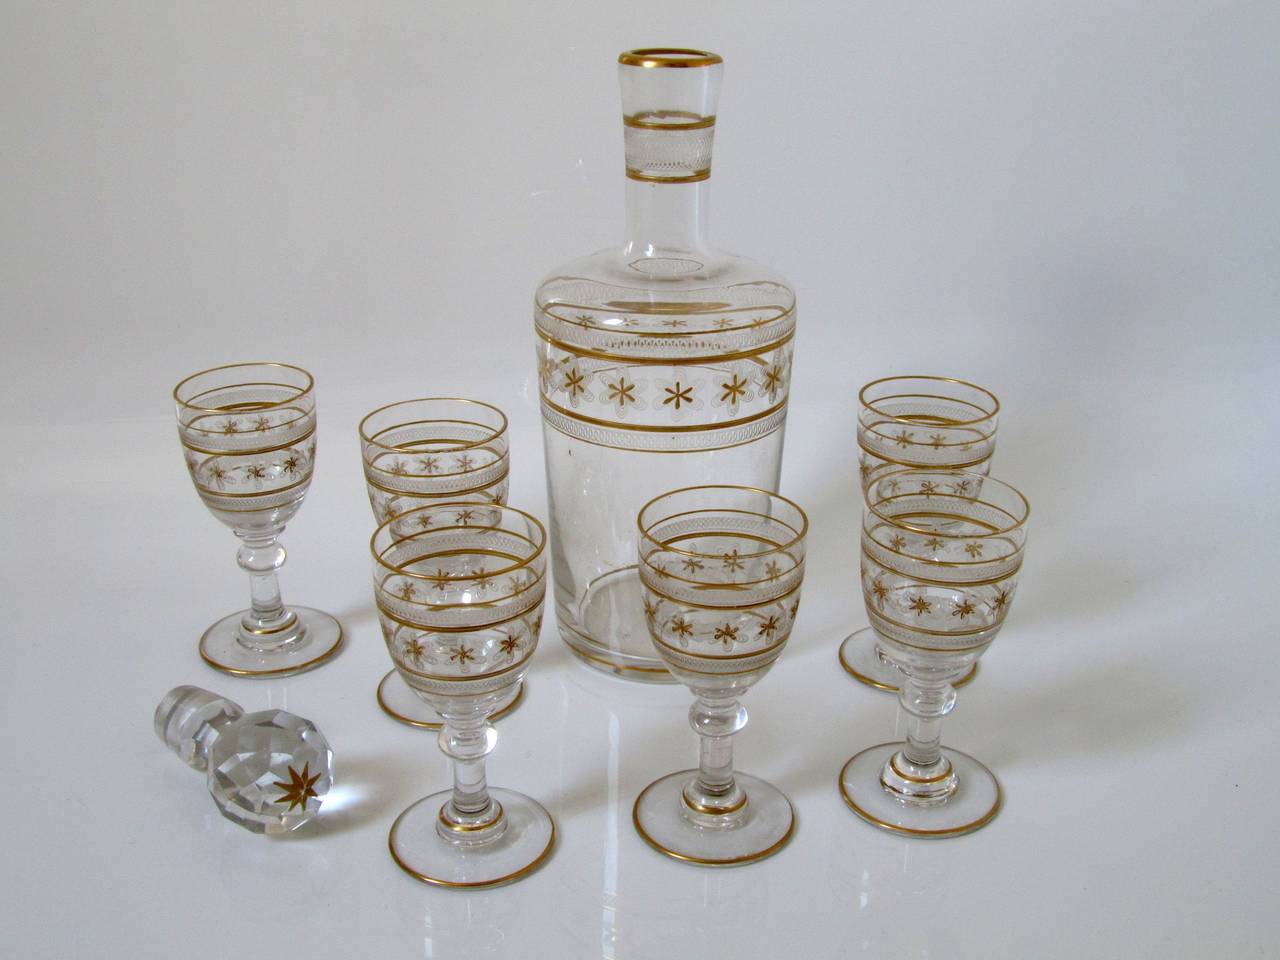 St. Louis Antique French Crystal Gilded Liquor or Aperitif Serving Set For Sale 1